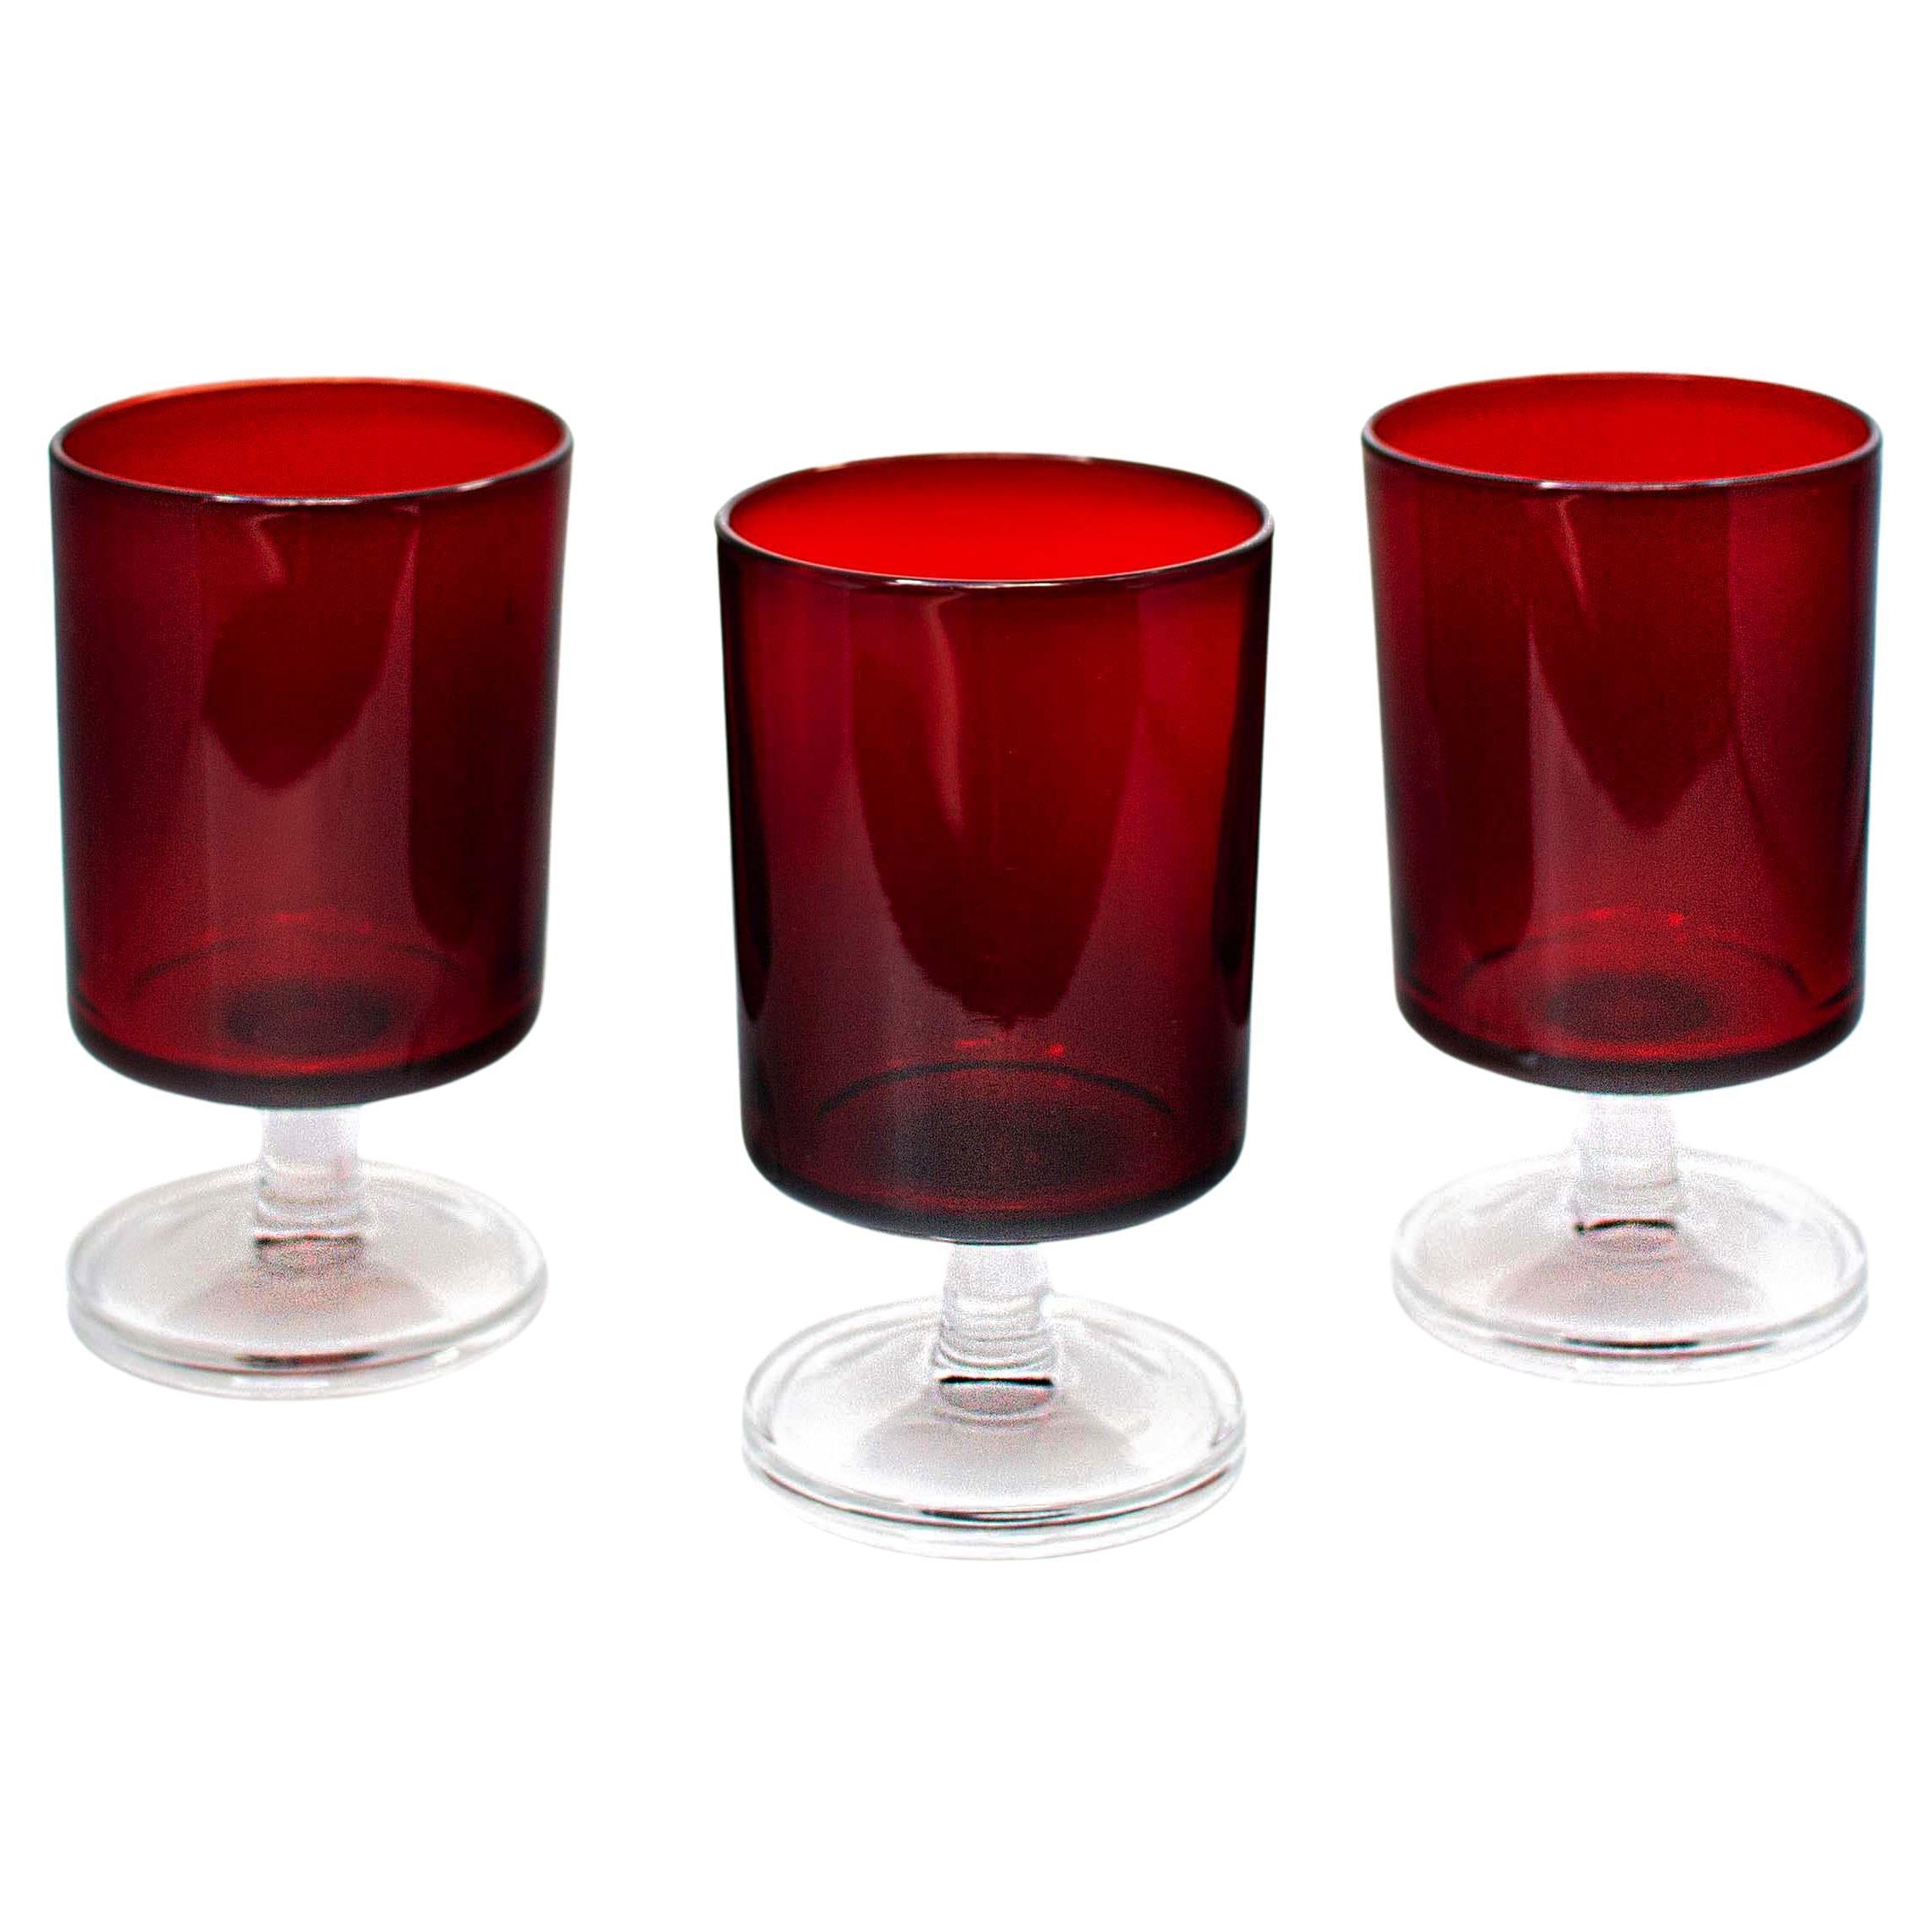 Arcoroc Ruby Cordial Glasses, Represented by Tuleste Factory 